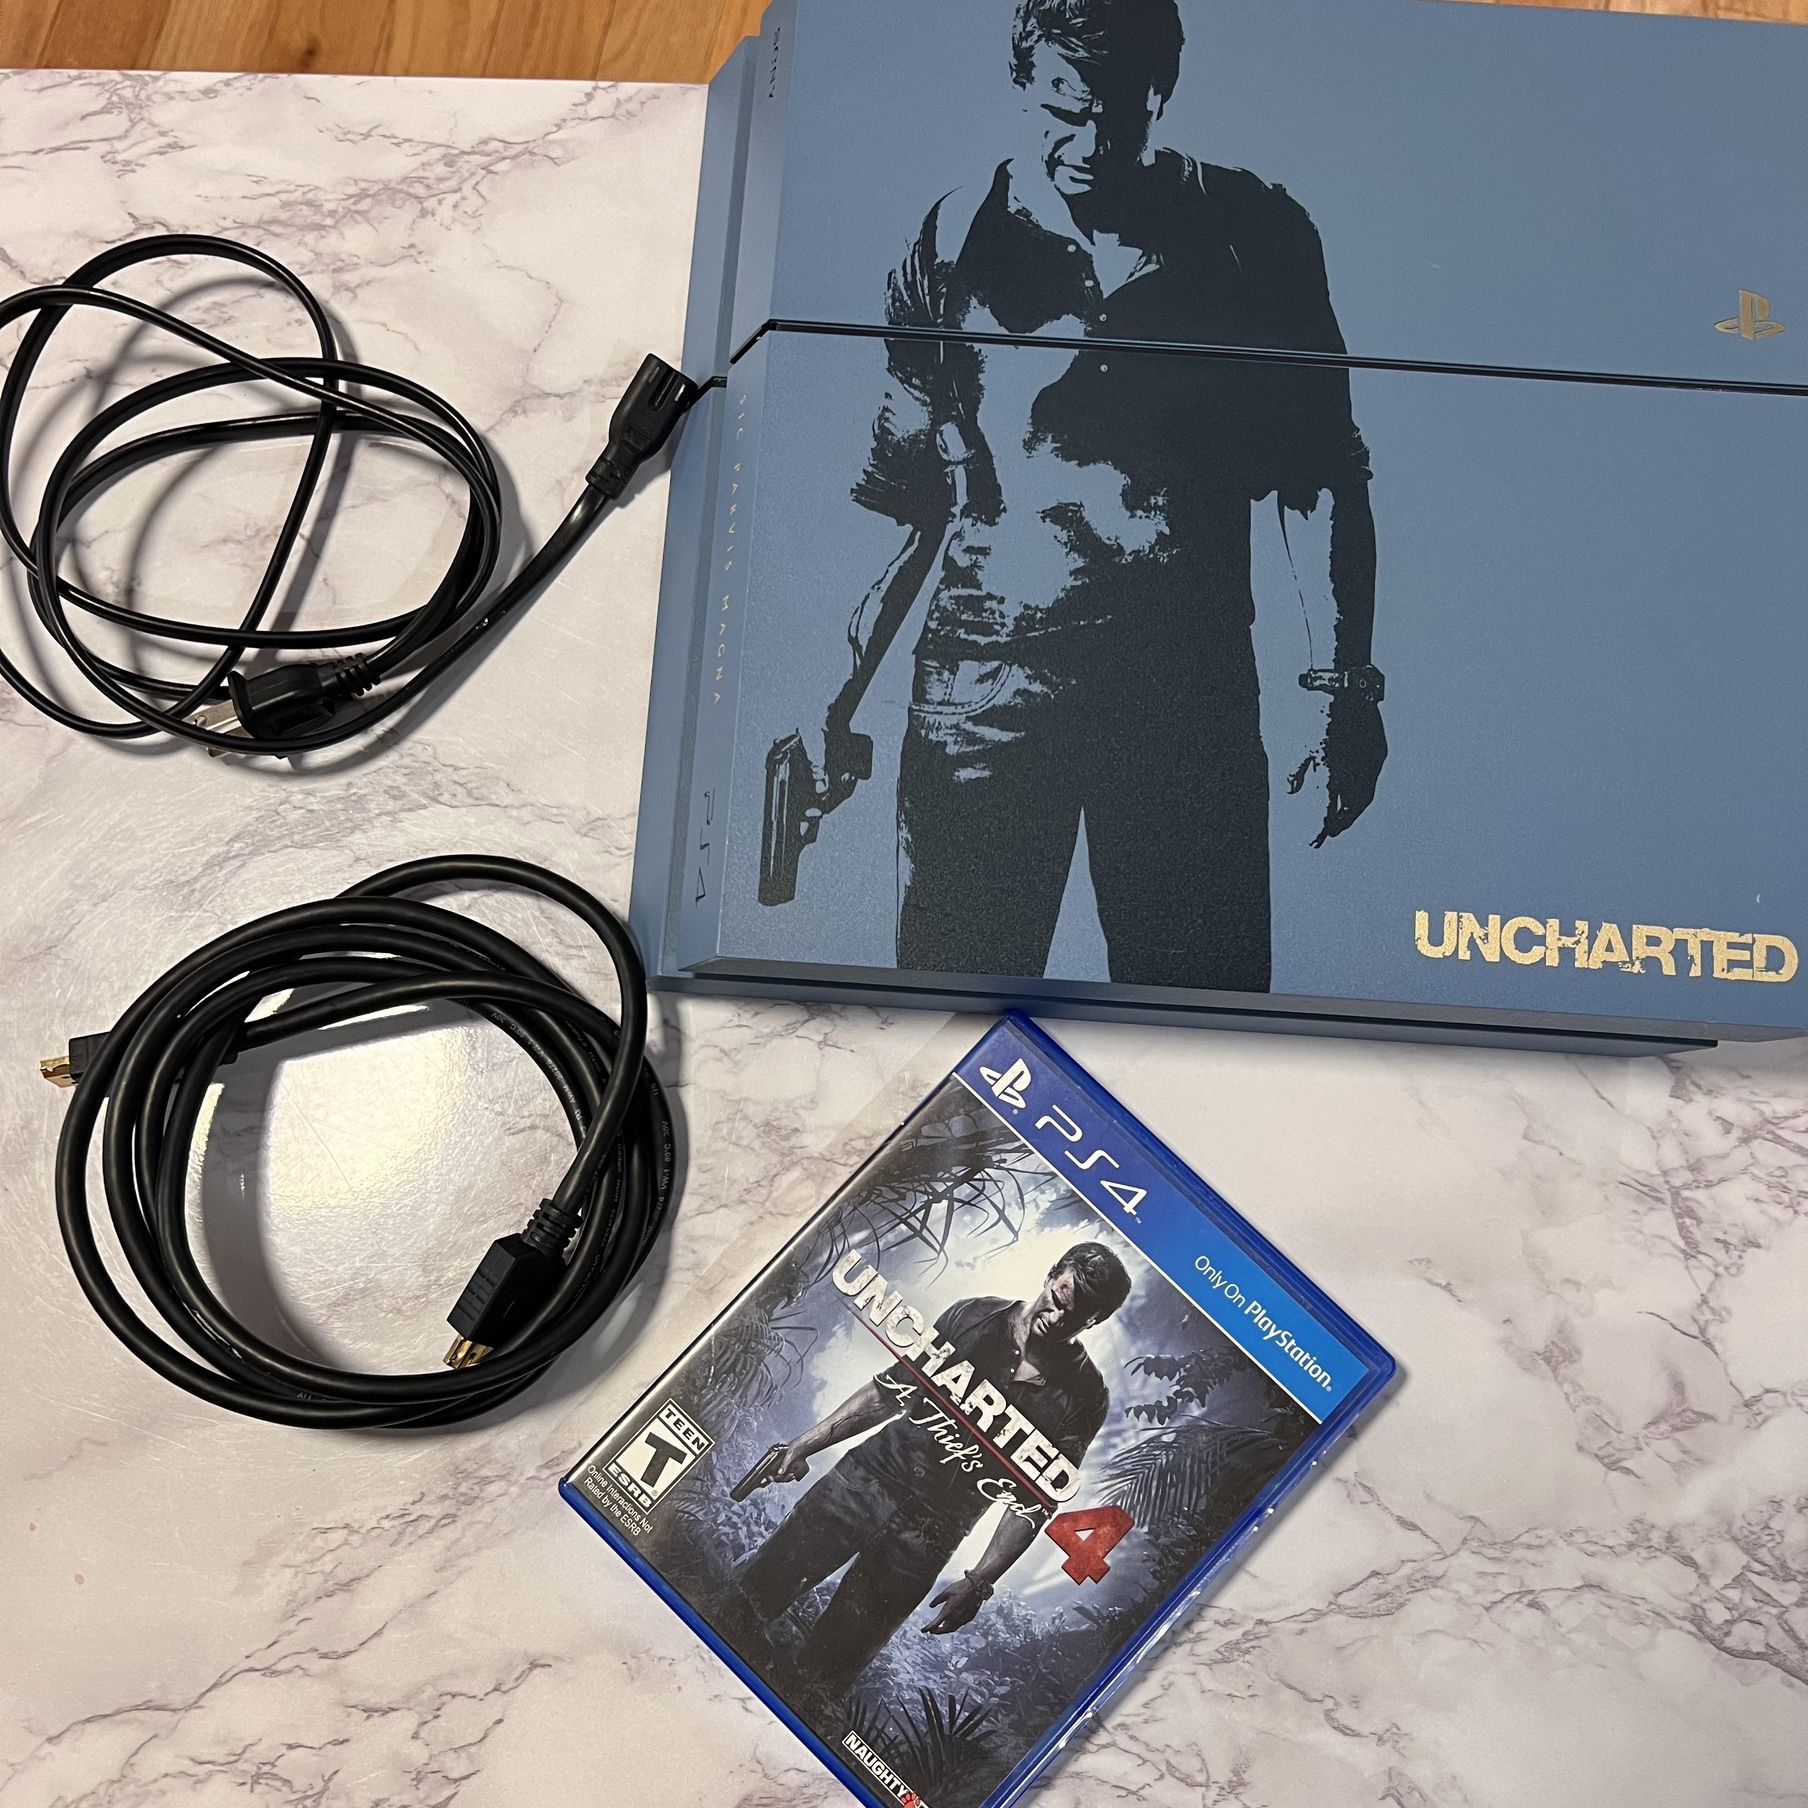 Uncharted PS4 with Uncharted 4 